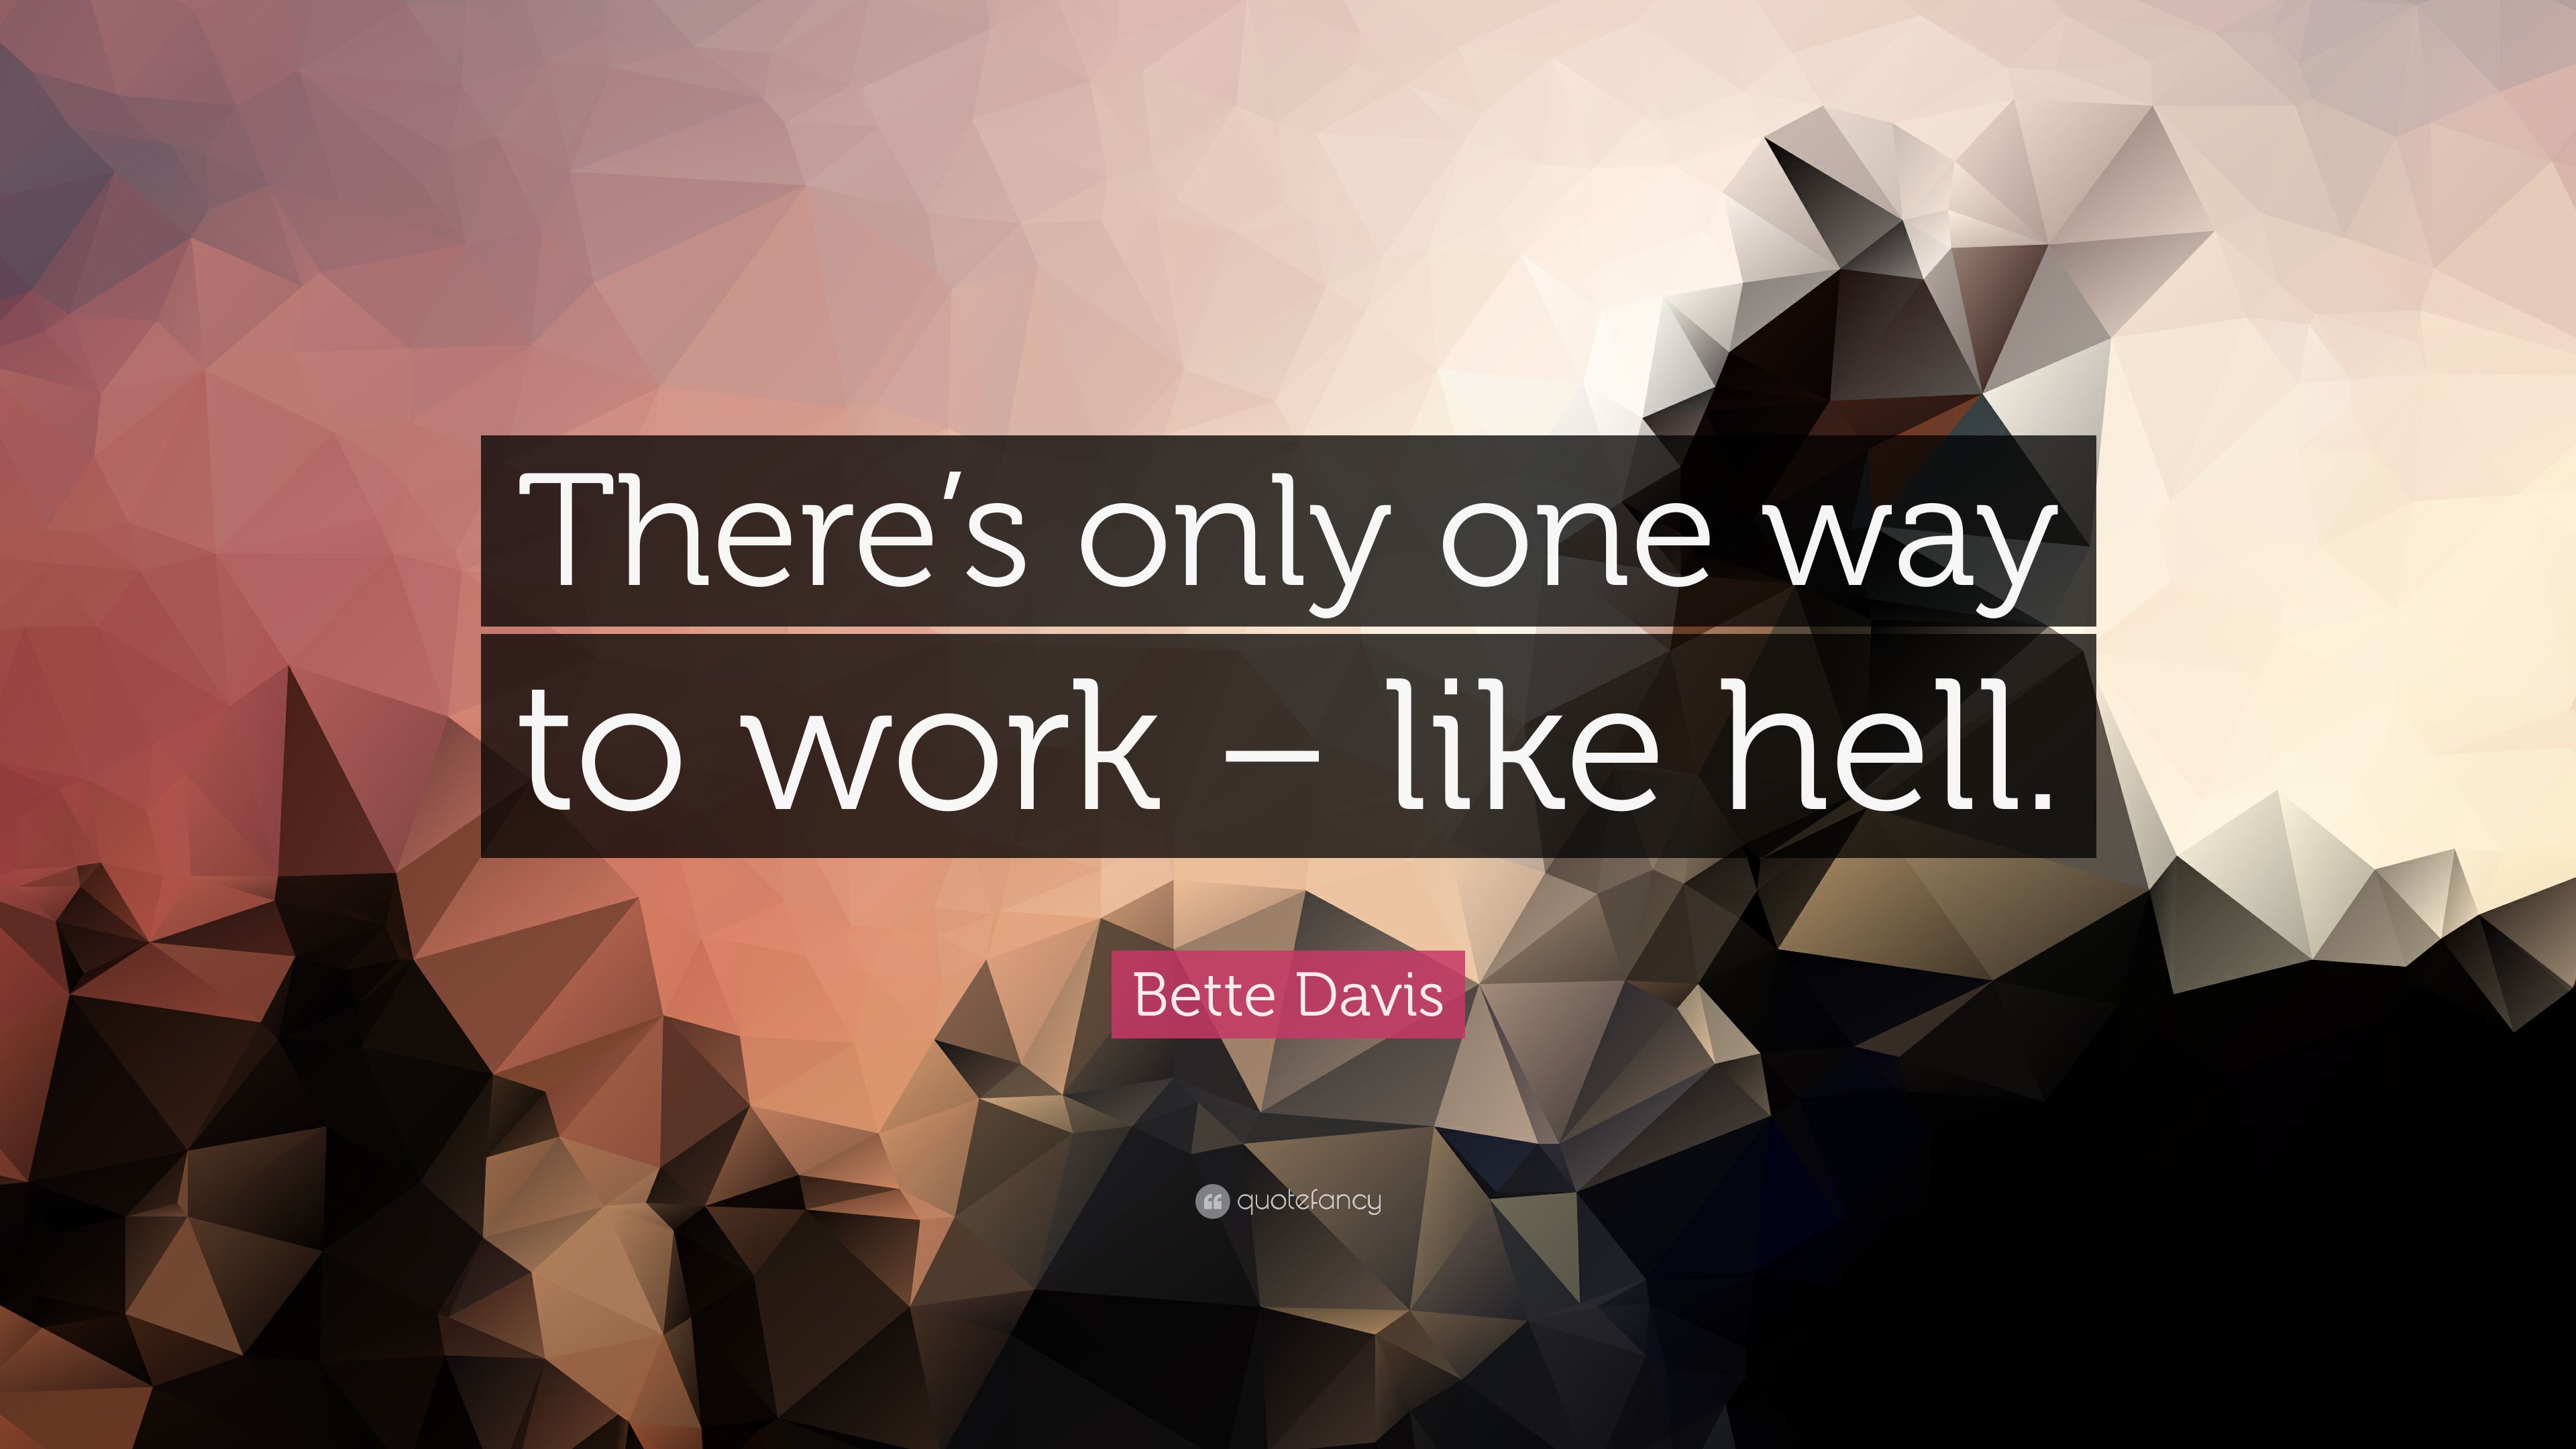 Bette Davis Quote: “There's only one way to work